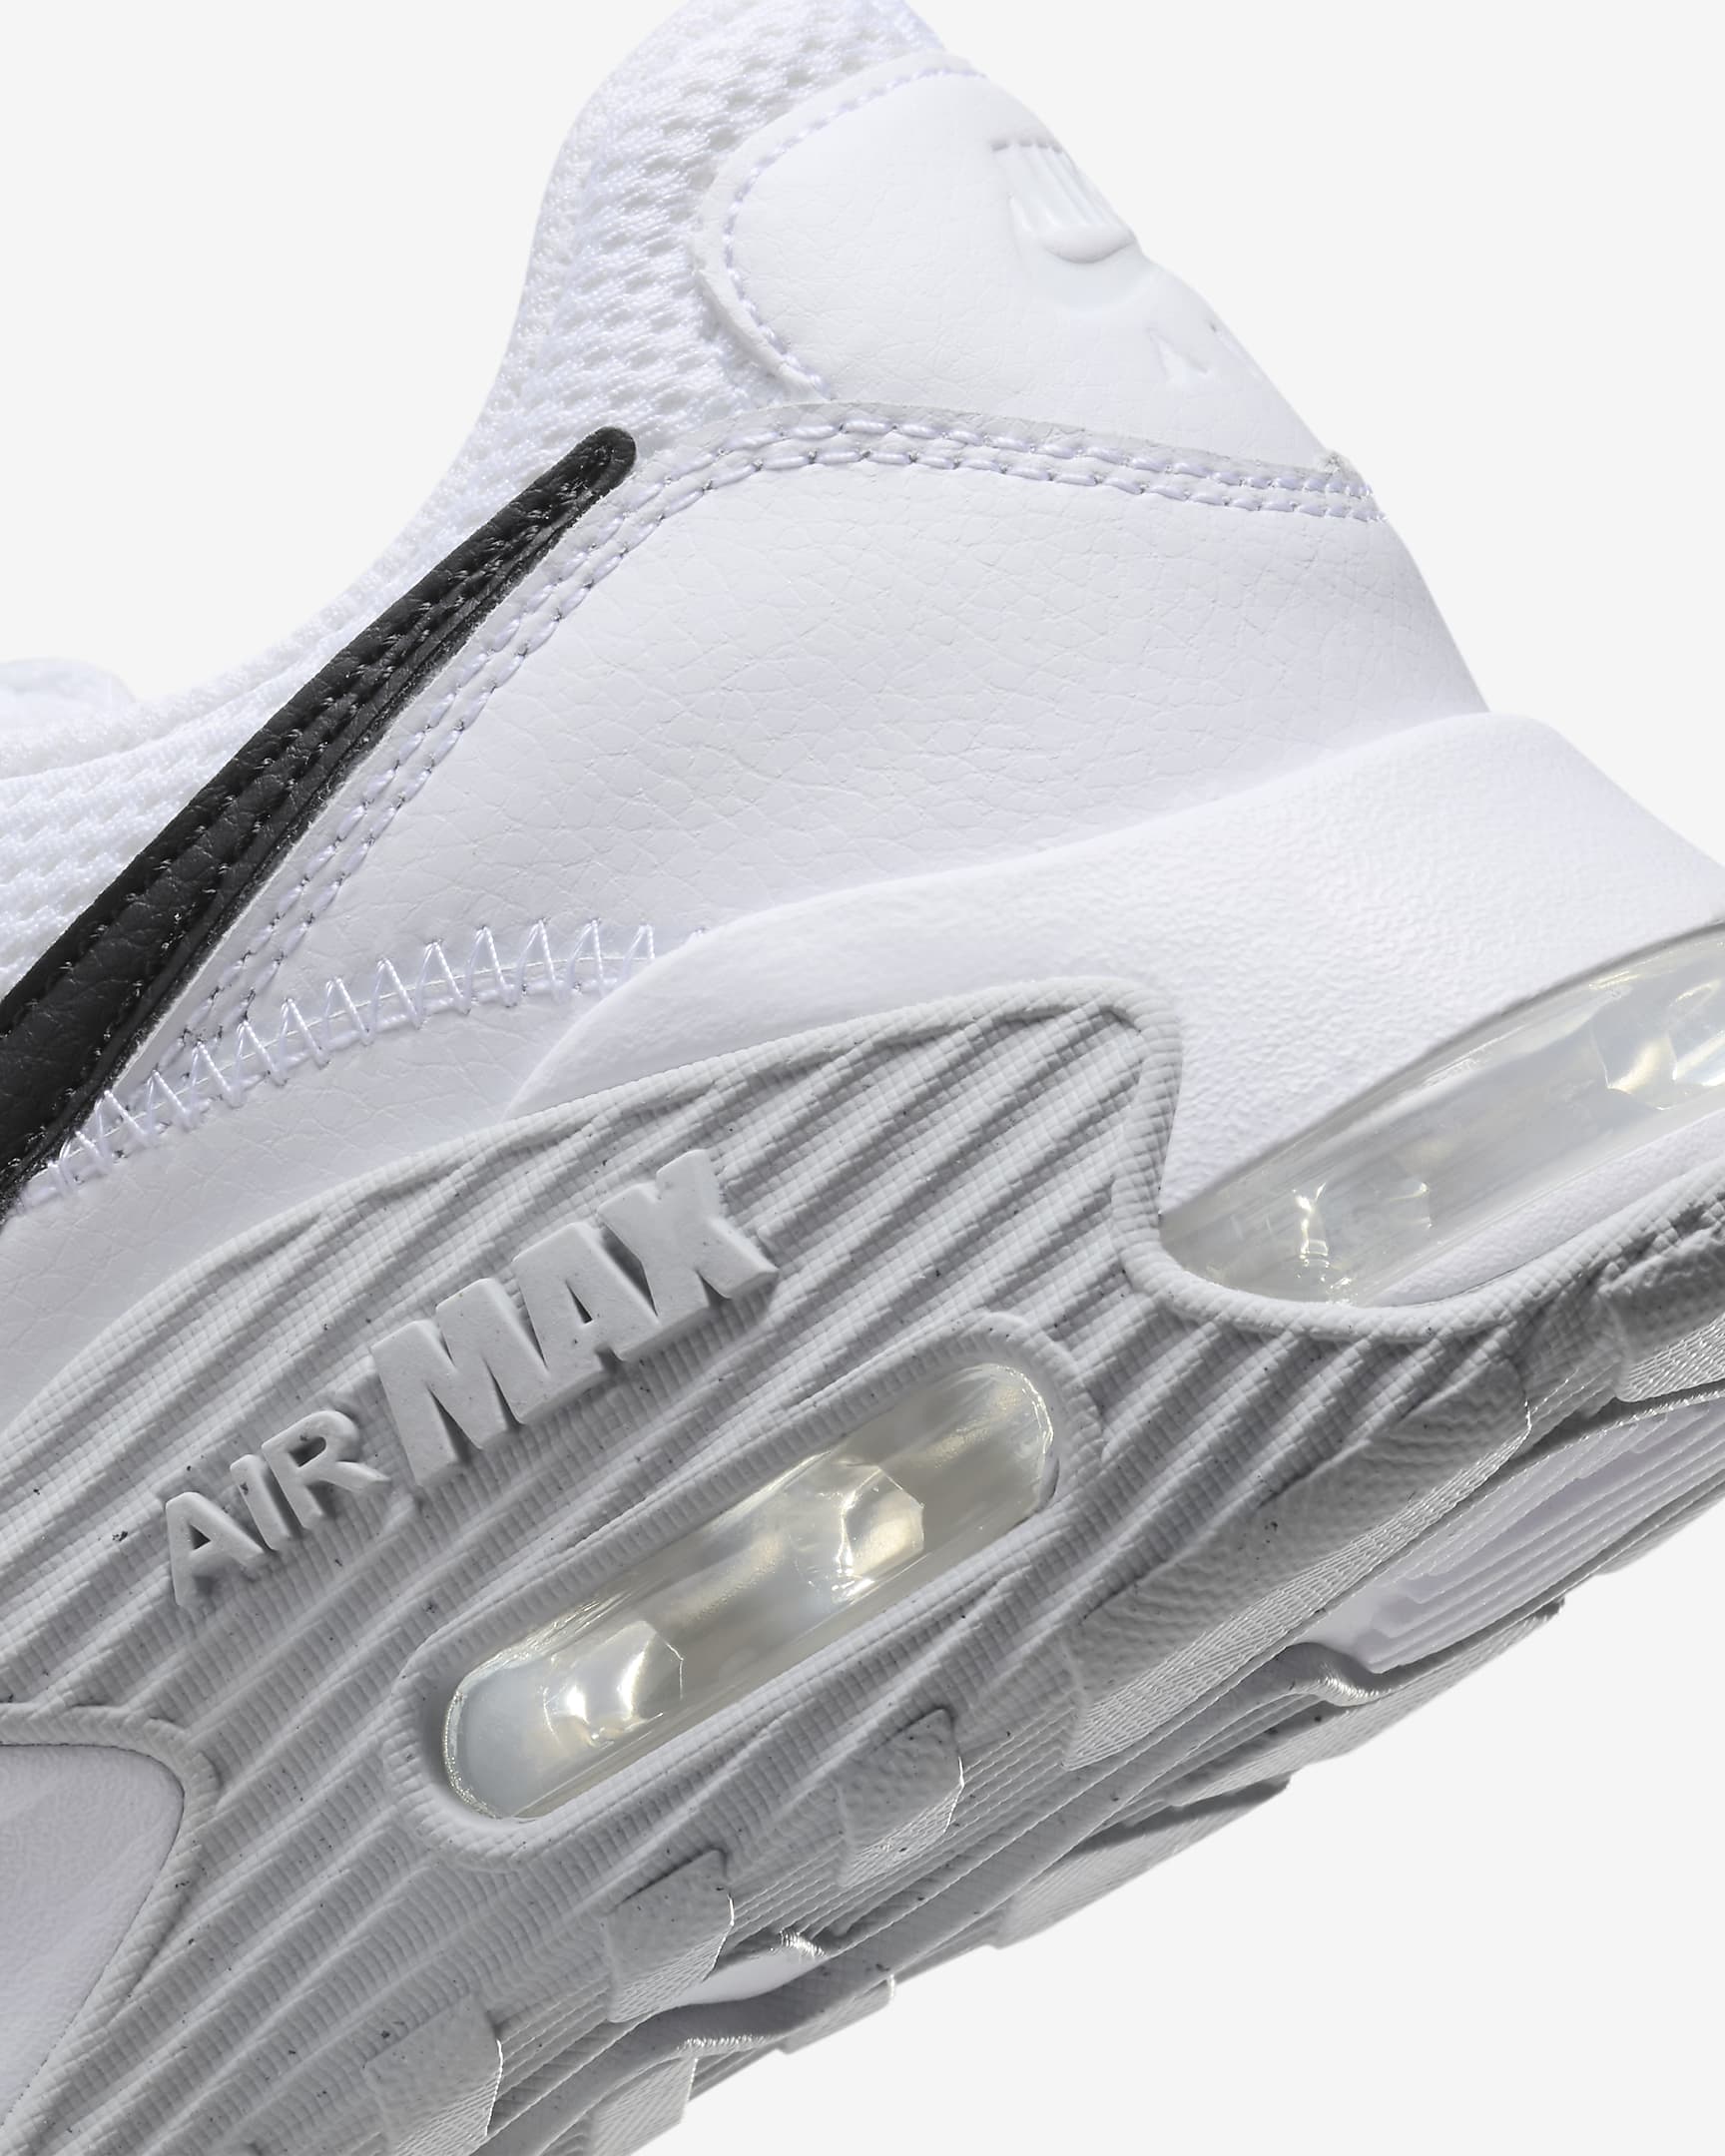 Nike Air Max Excee Women's Shoes - White/Pure Platinum/Black